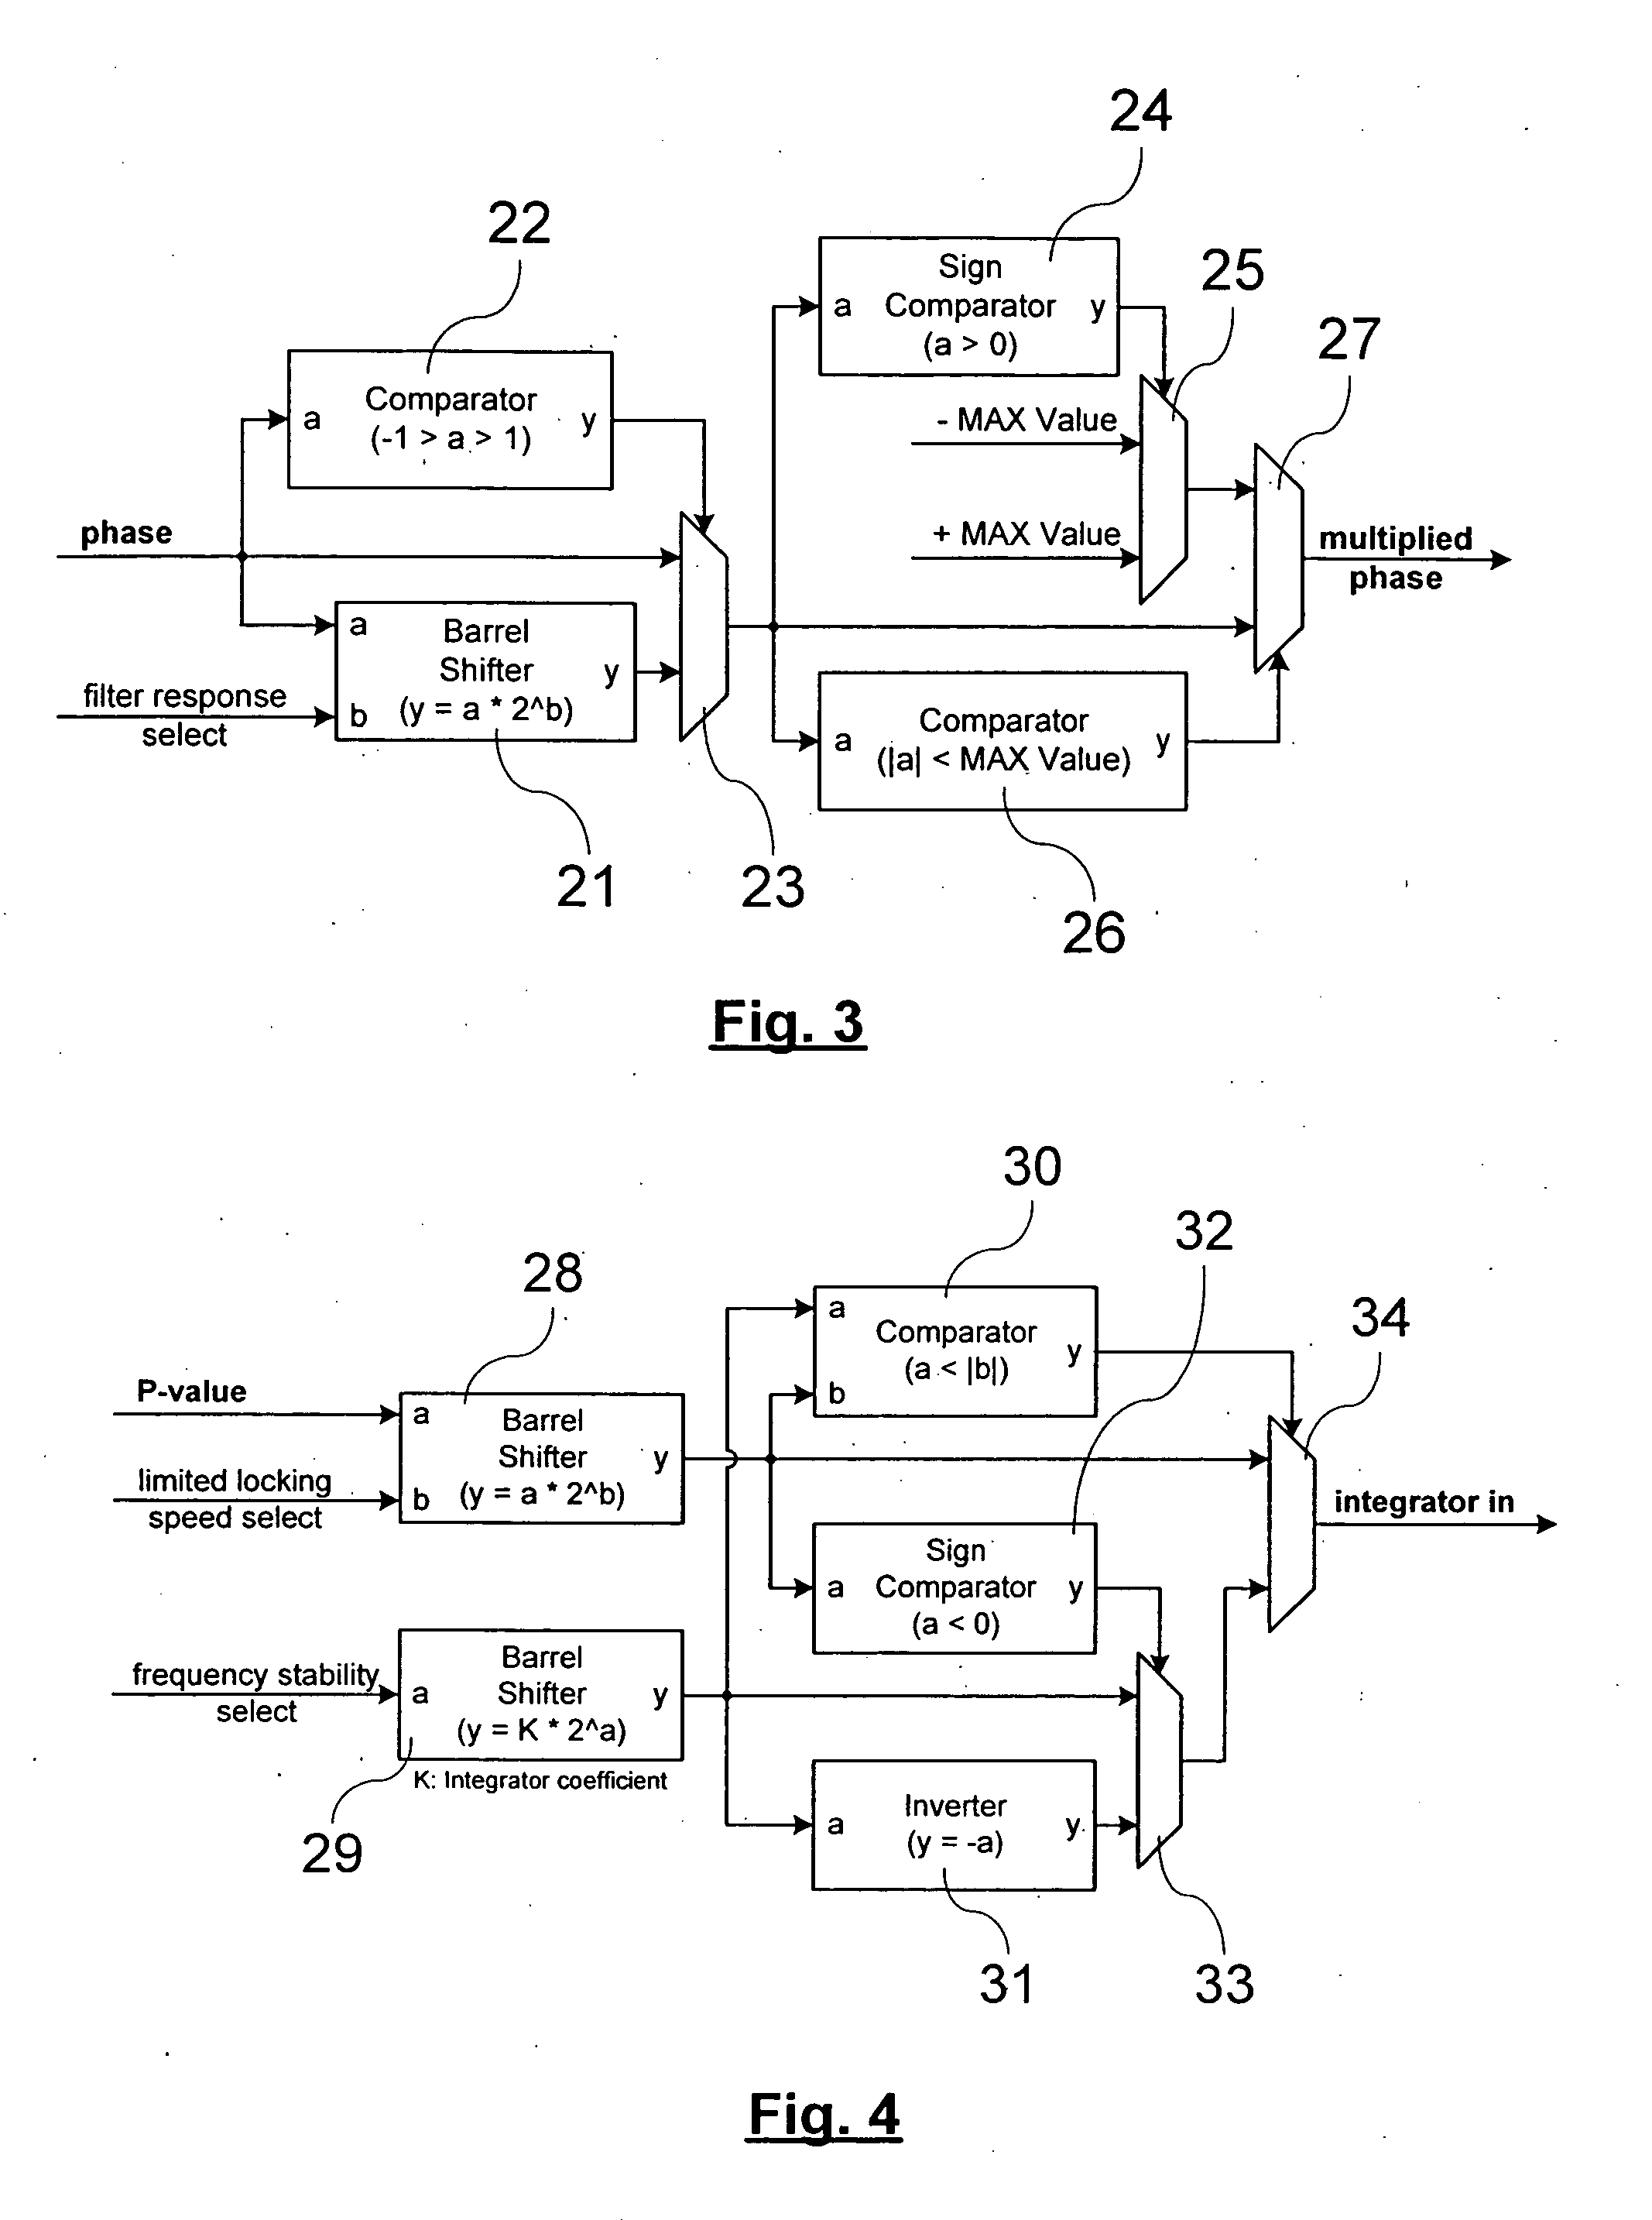 Digital phase locked loop with selectable normal or fast-locking capability